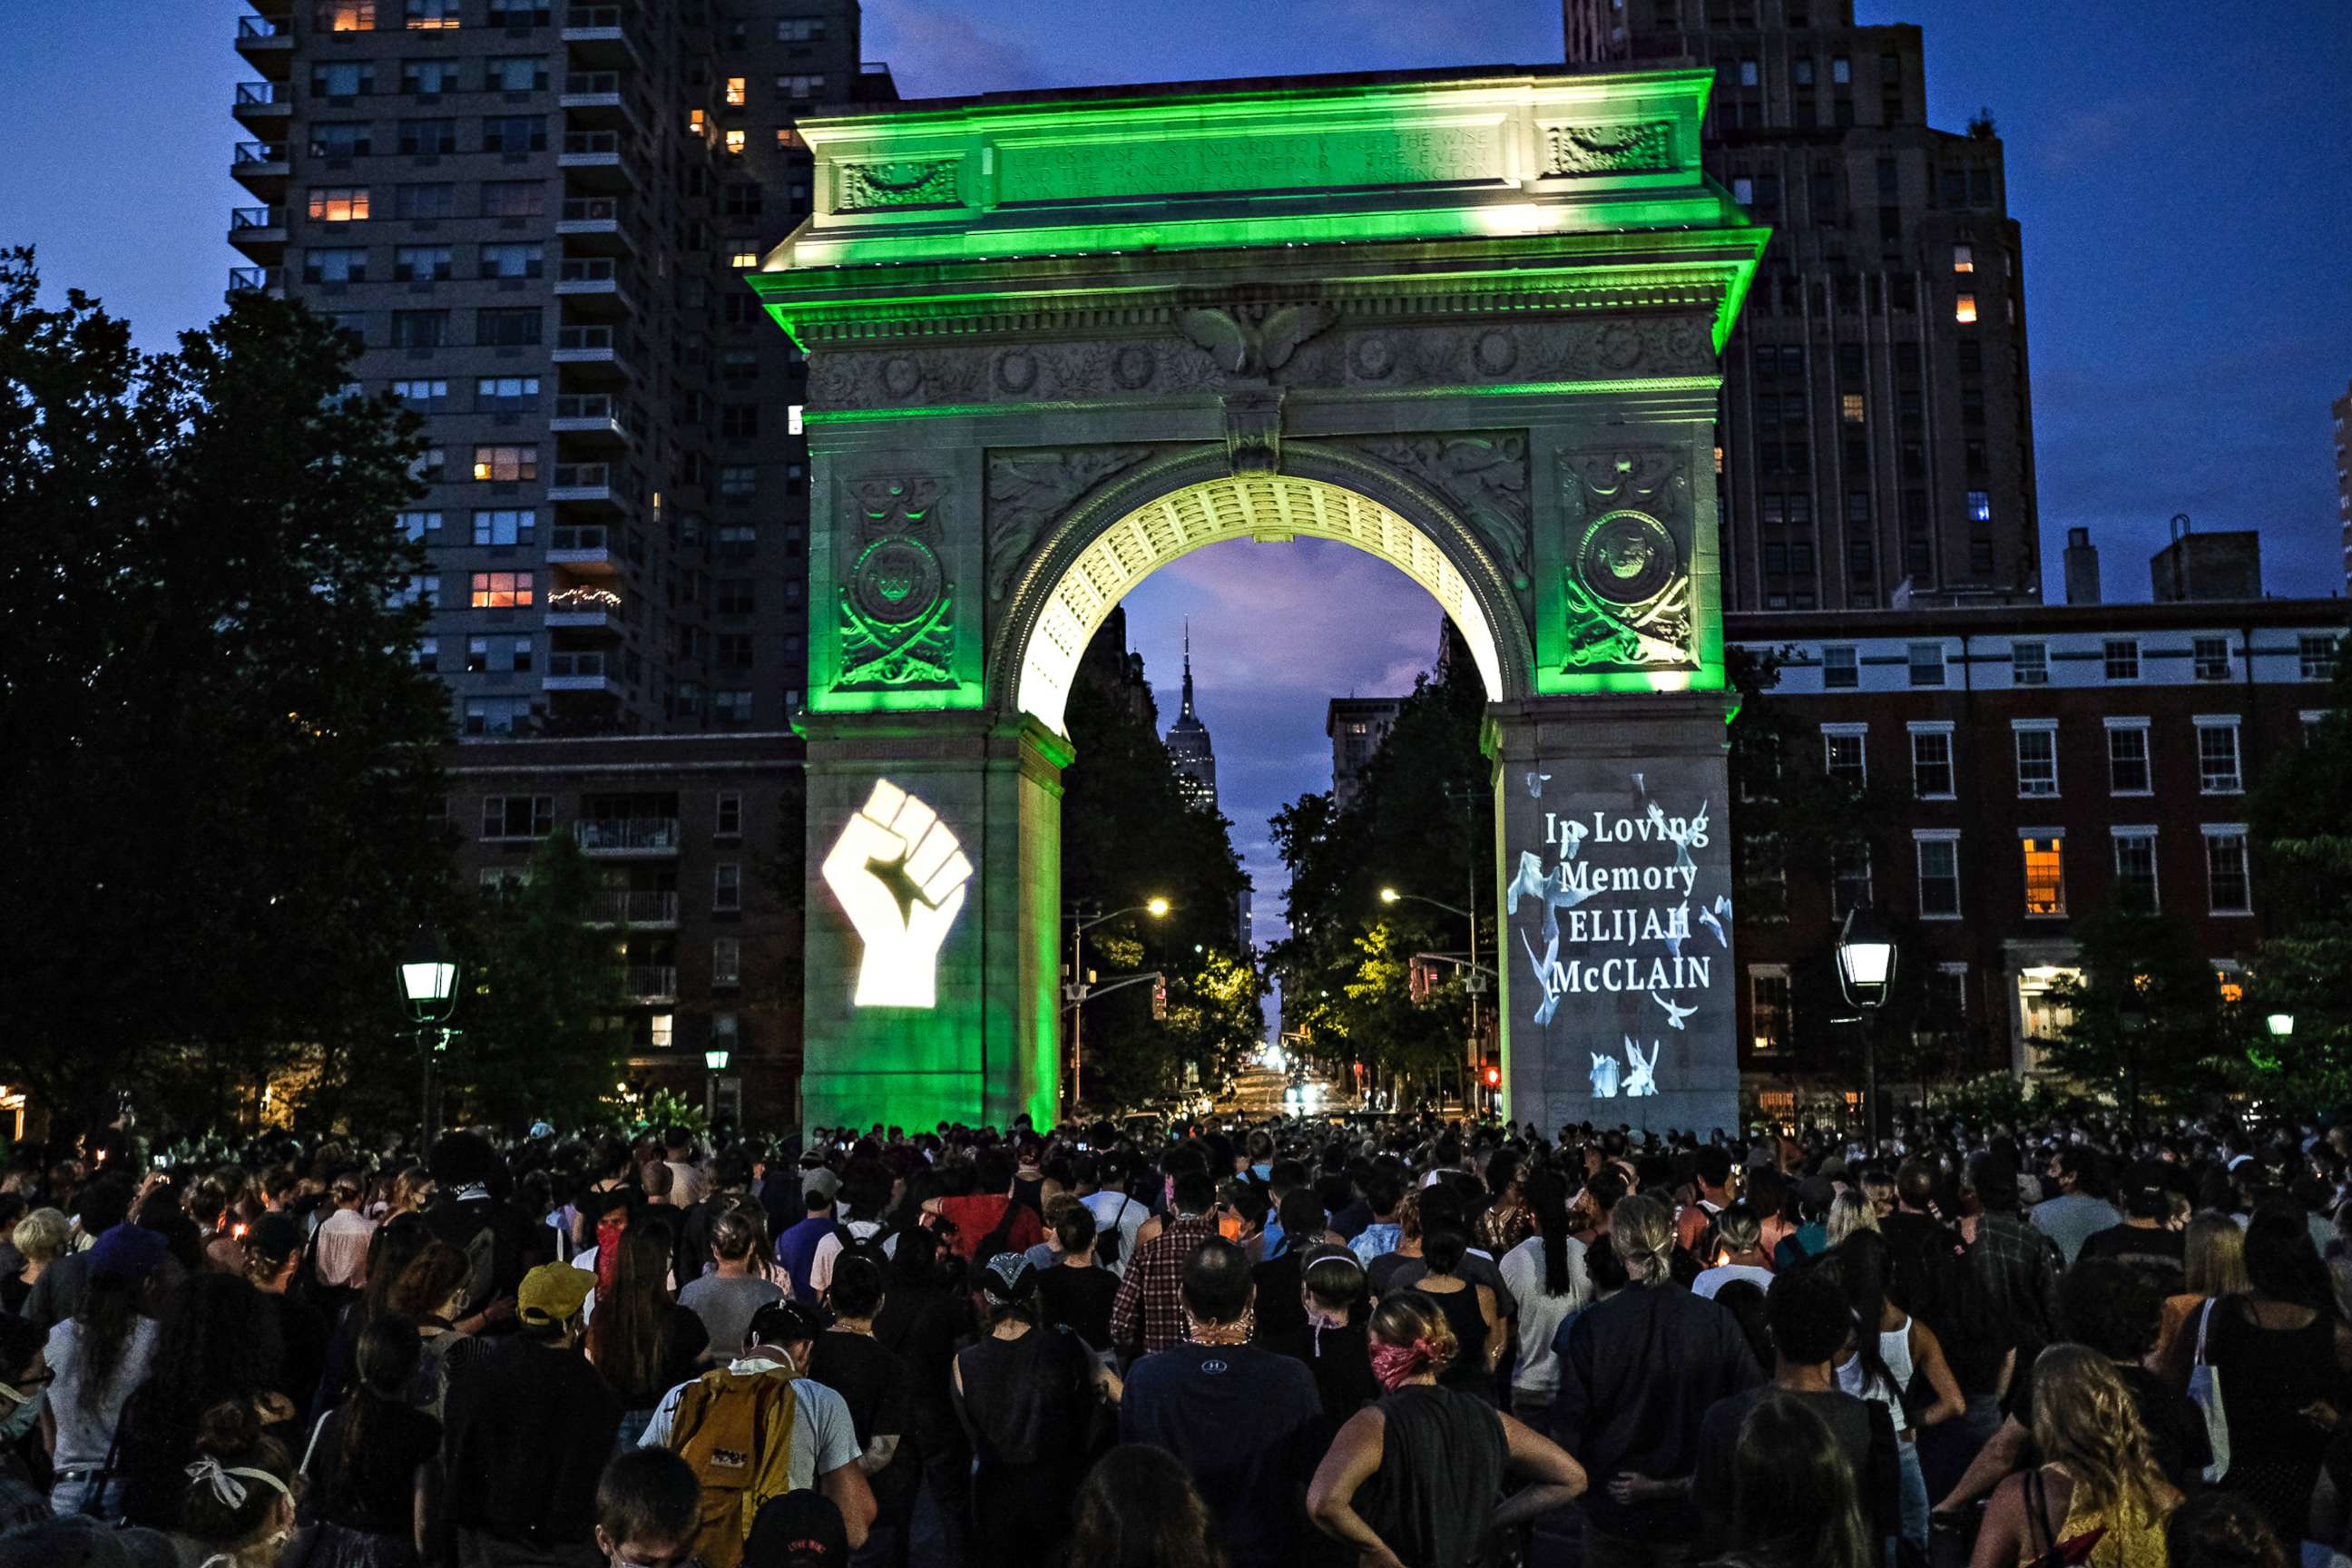 PHOTO: String players perform during a violin vigil for Elijah McClain in Washington Square Park in New York City, June 29, 2020.